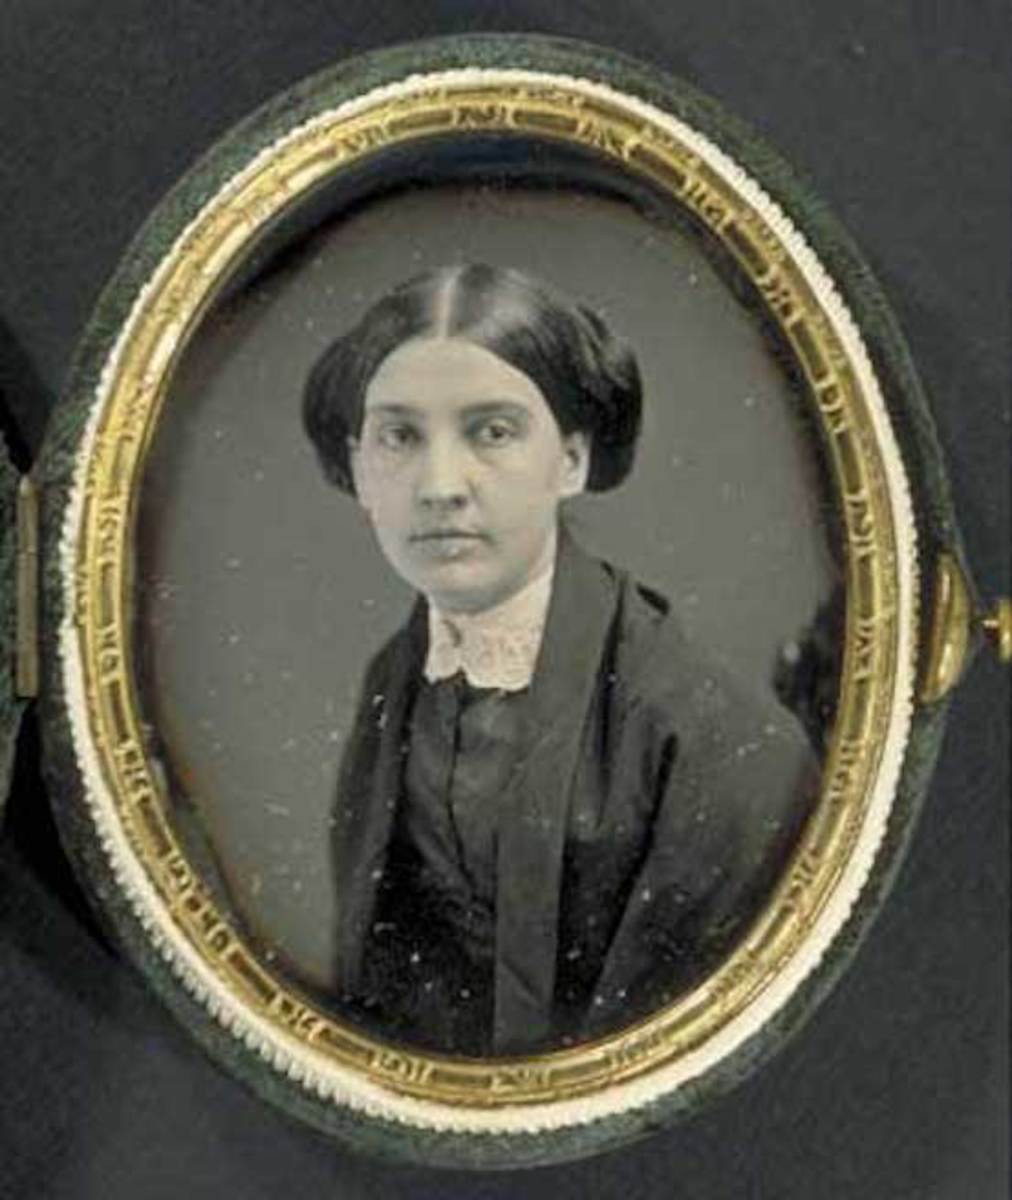 Susan Dickinson - Emily's sister-in-law